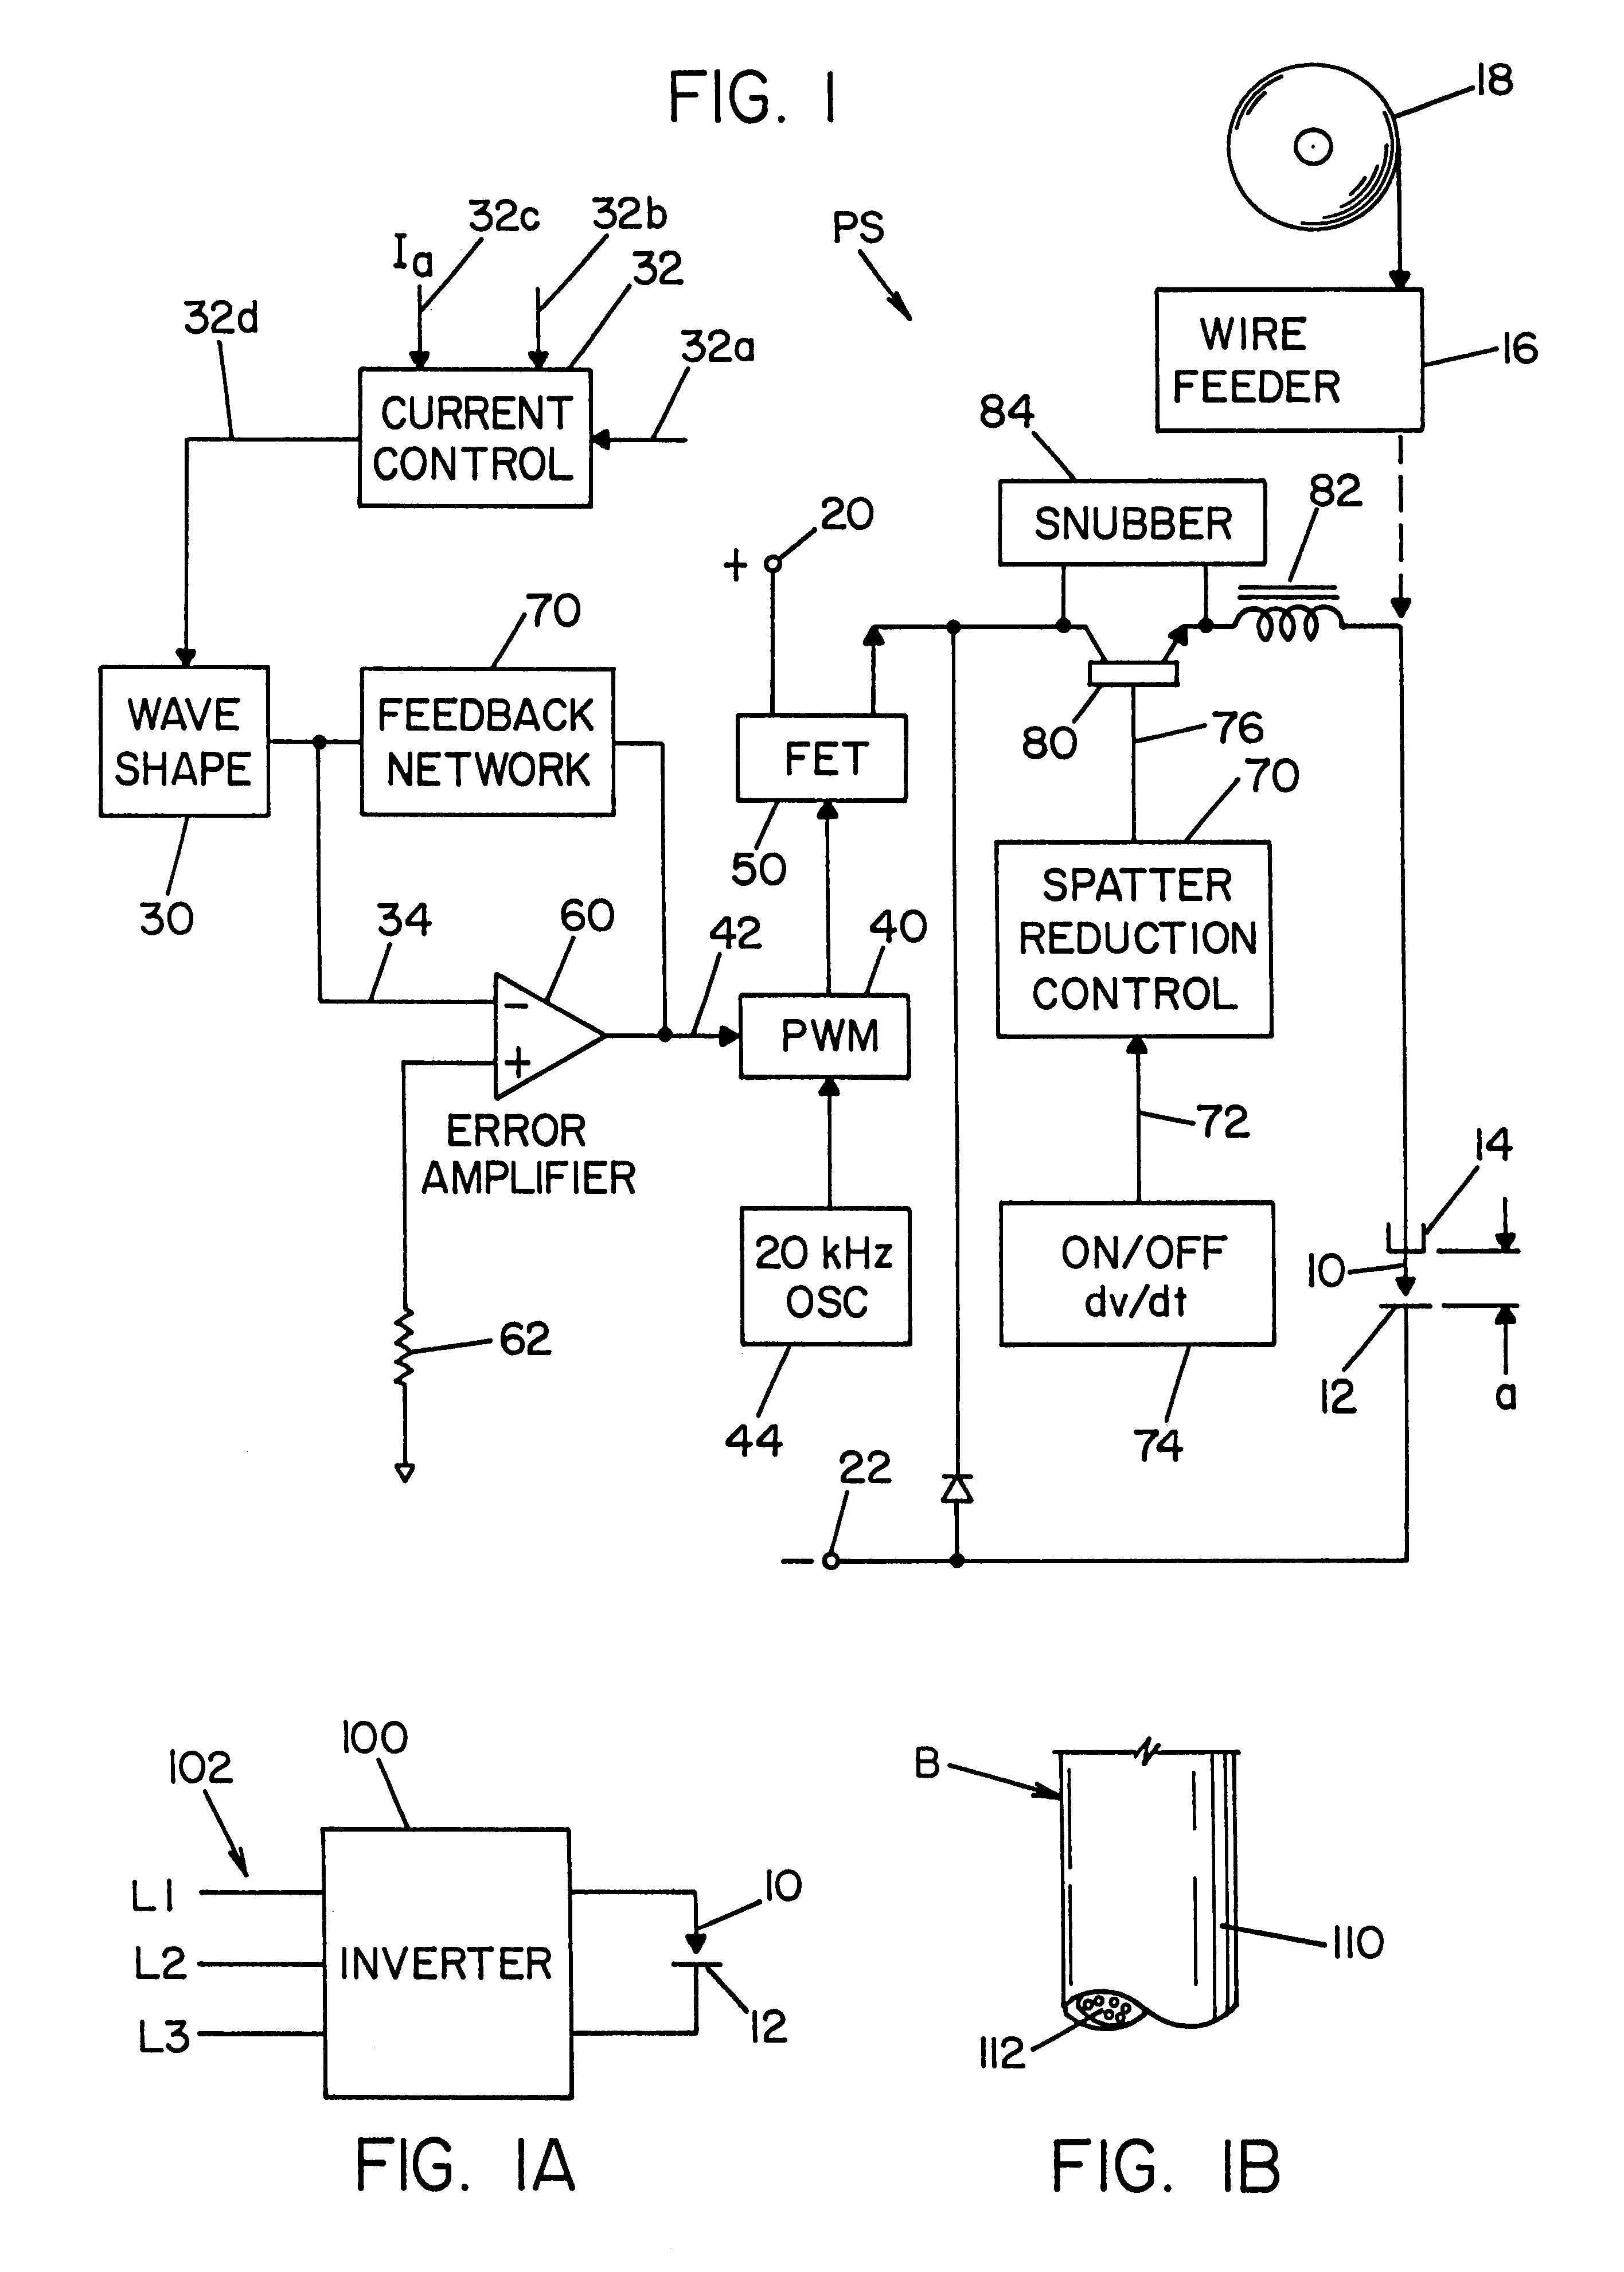 Method and apparatus for electric arc welding